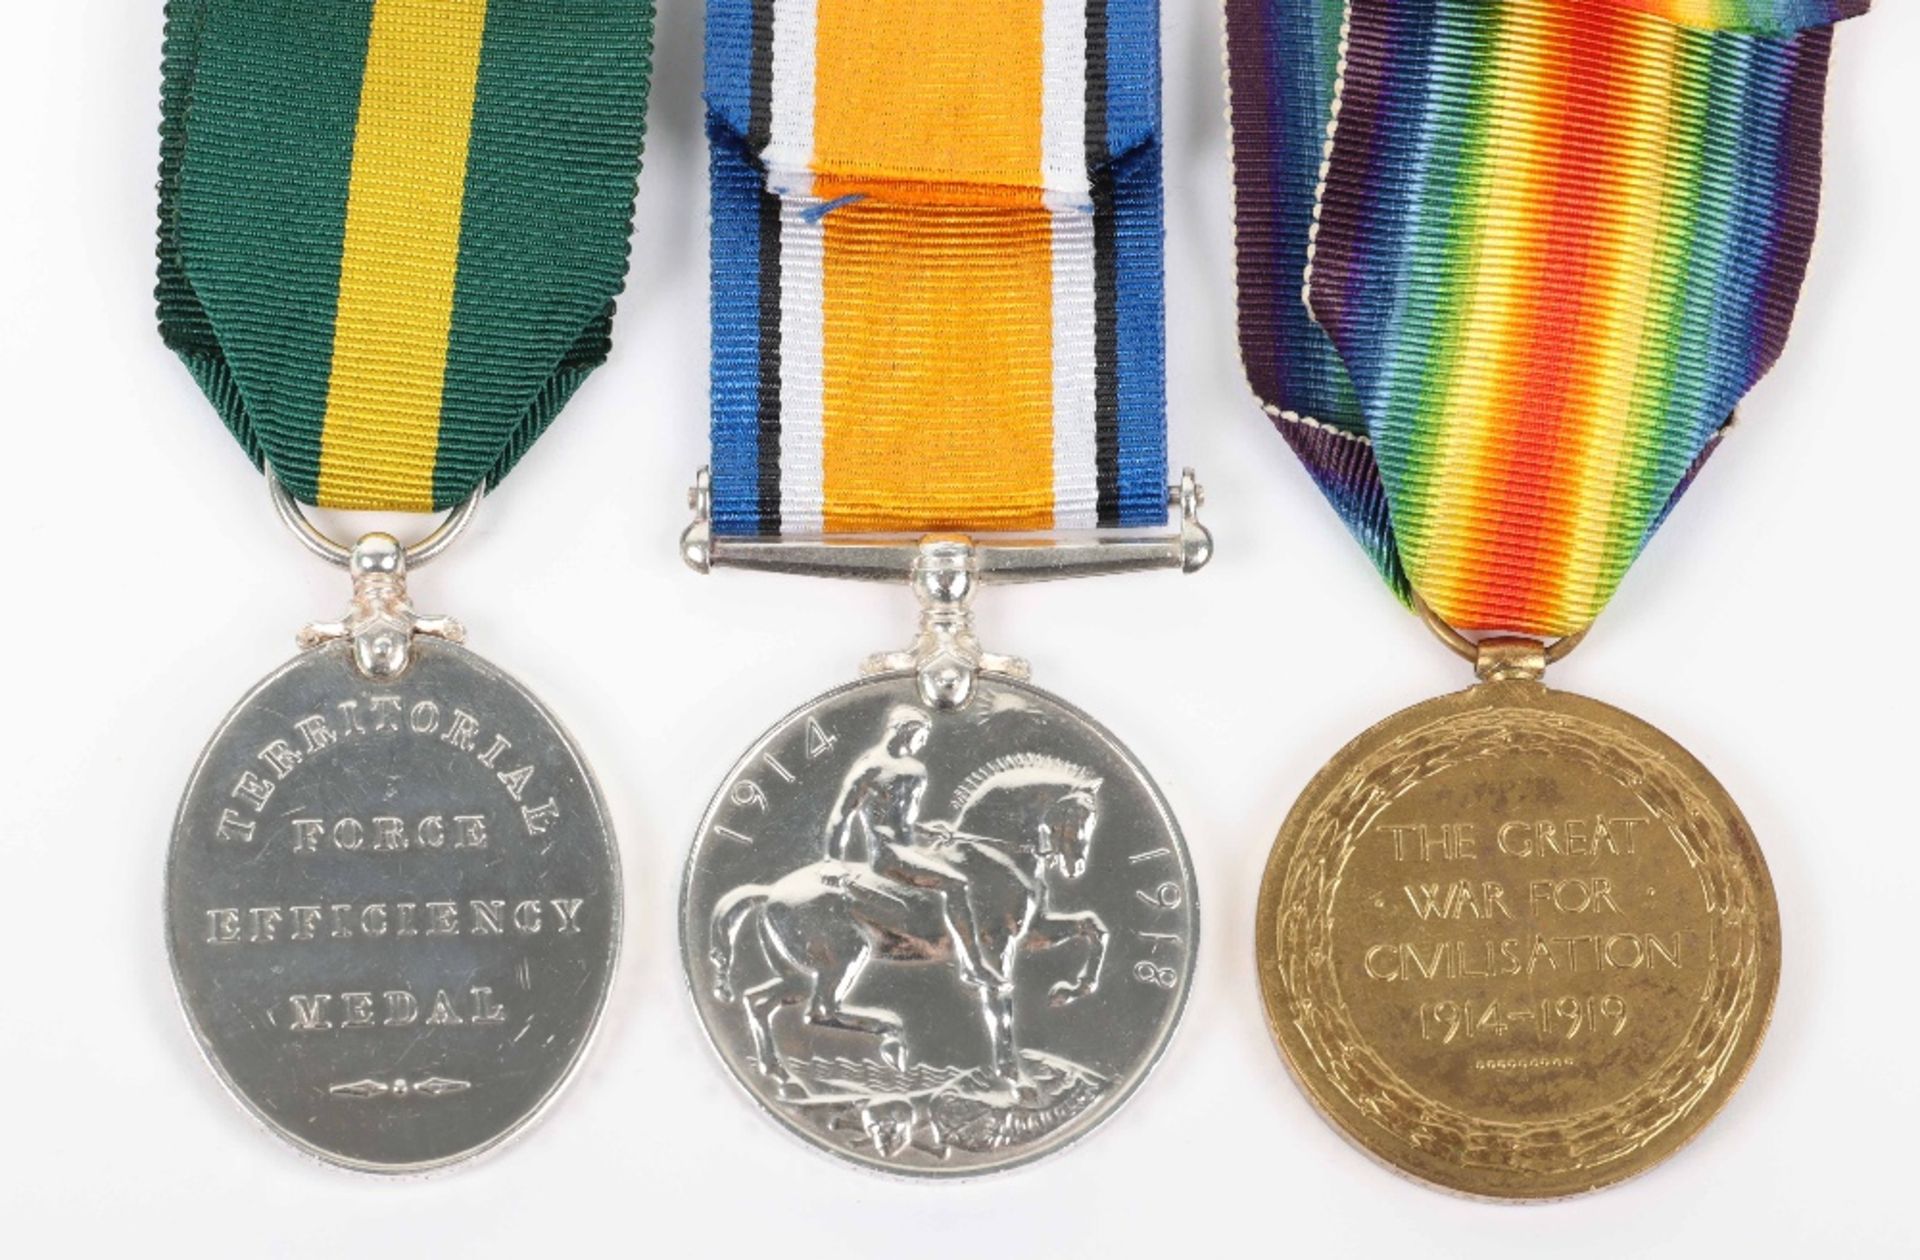 Great War Territorial Force Efficiency Medal Group of Three 1st Wessex Field Ambulance Royal Army Me - Image 4 of 4